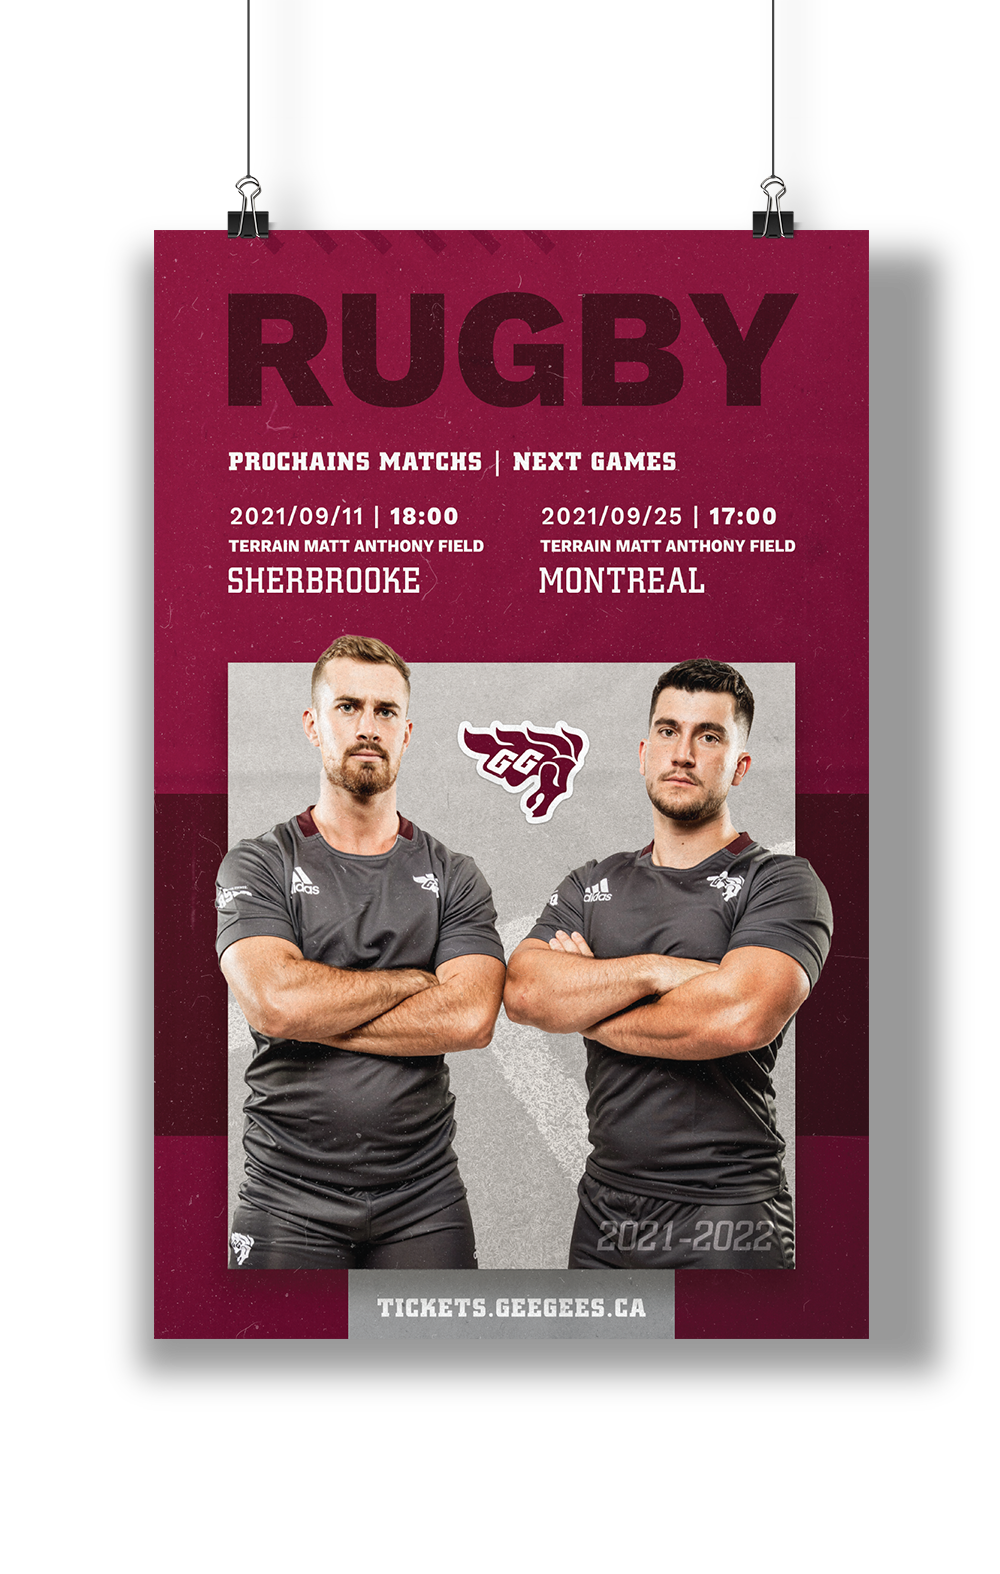 Poster promoting men's rugby game.